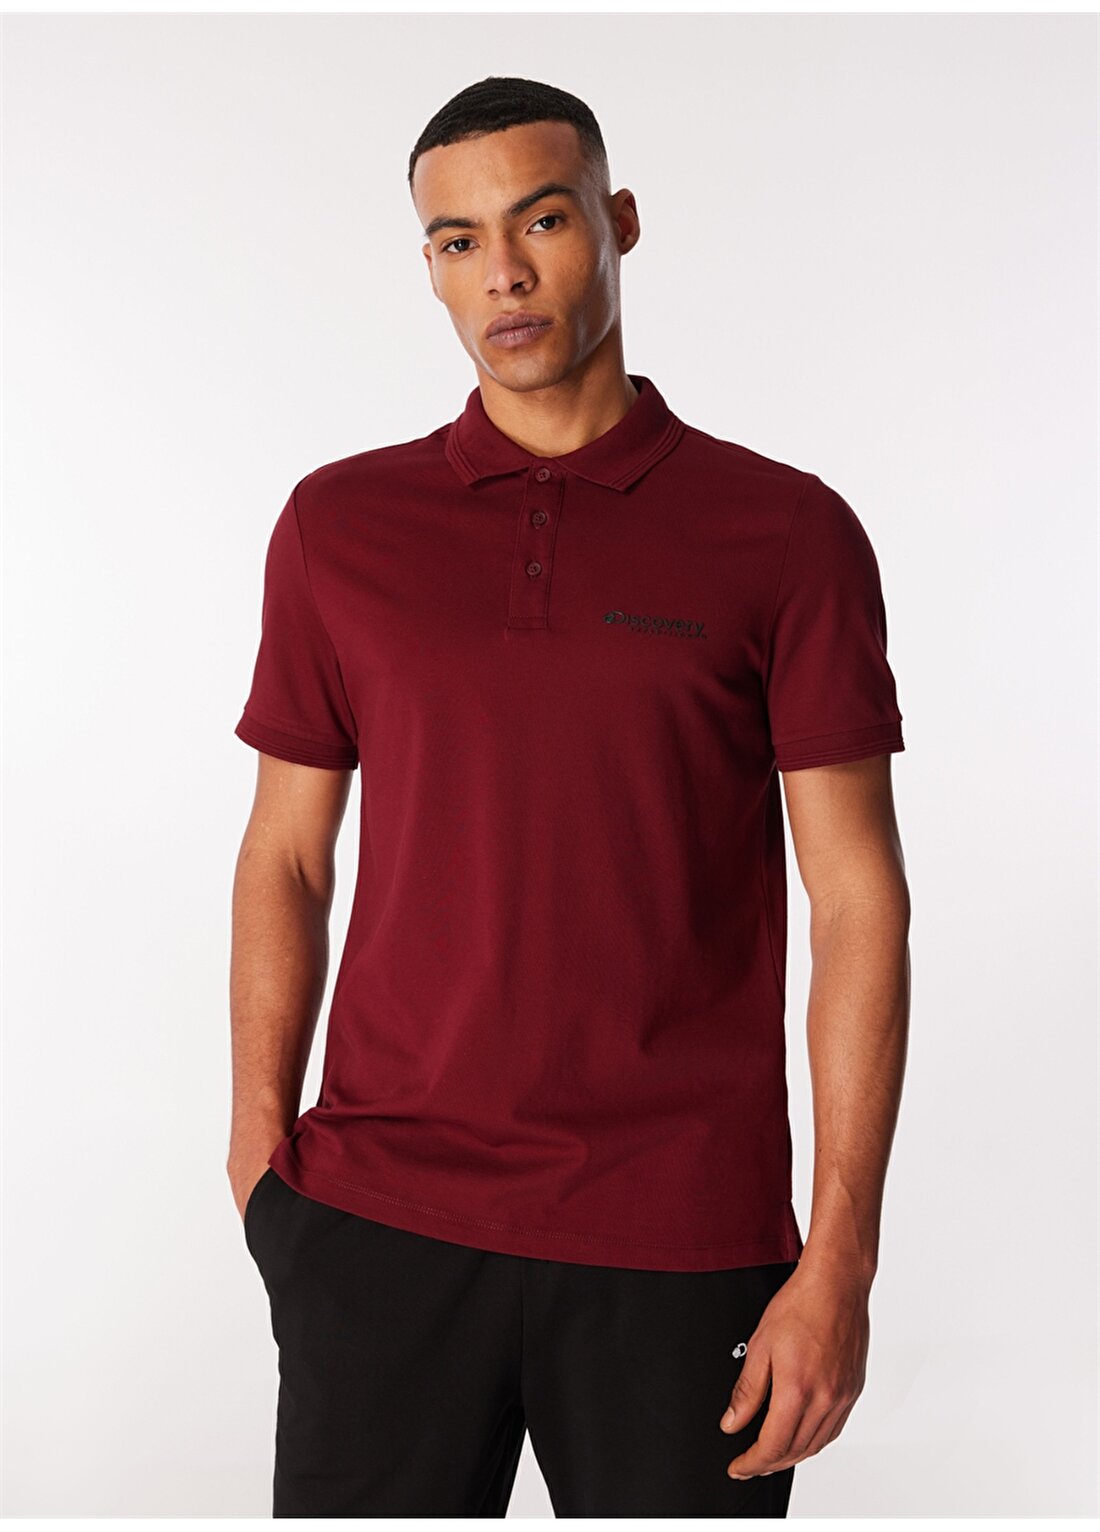 Discovery Expedition Bordo Erkek Relaxed Fit Polo T-Shirt D4SM-TST3248